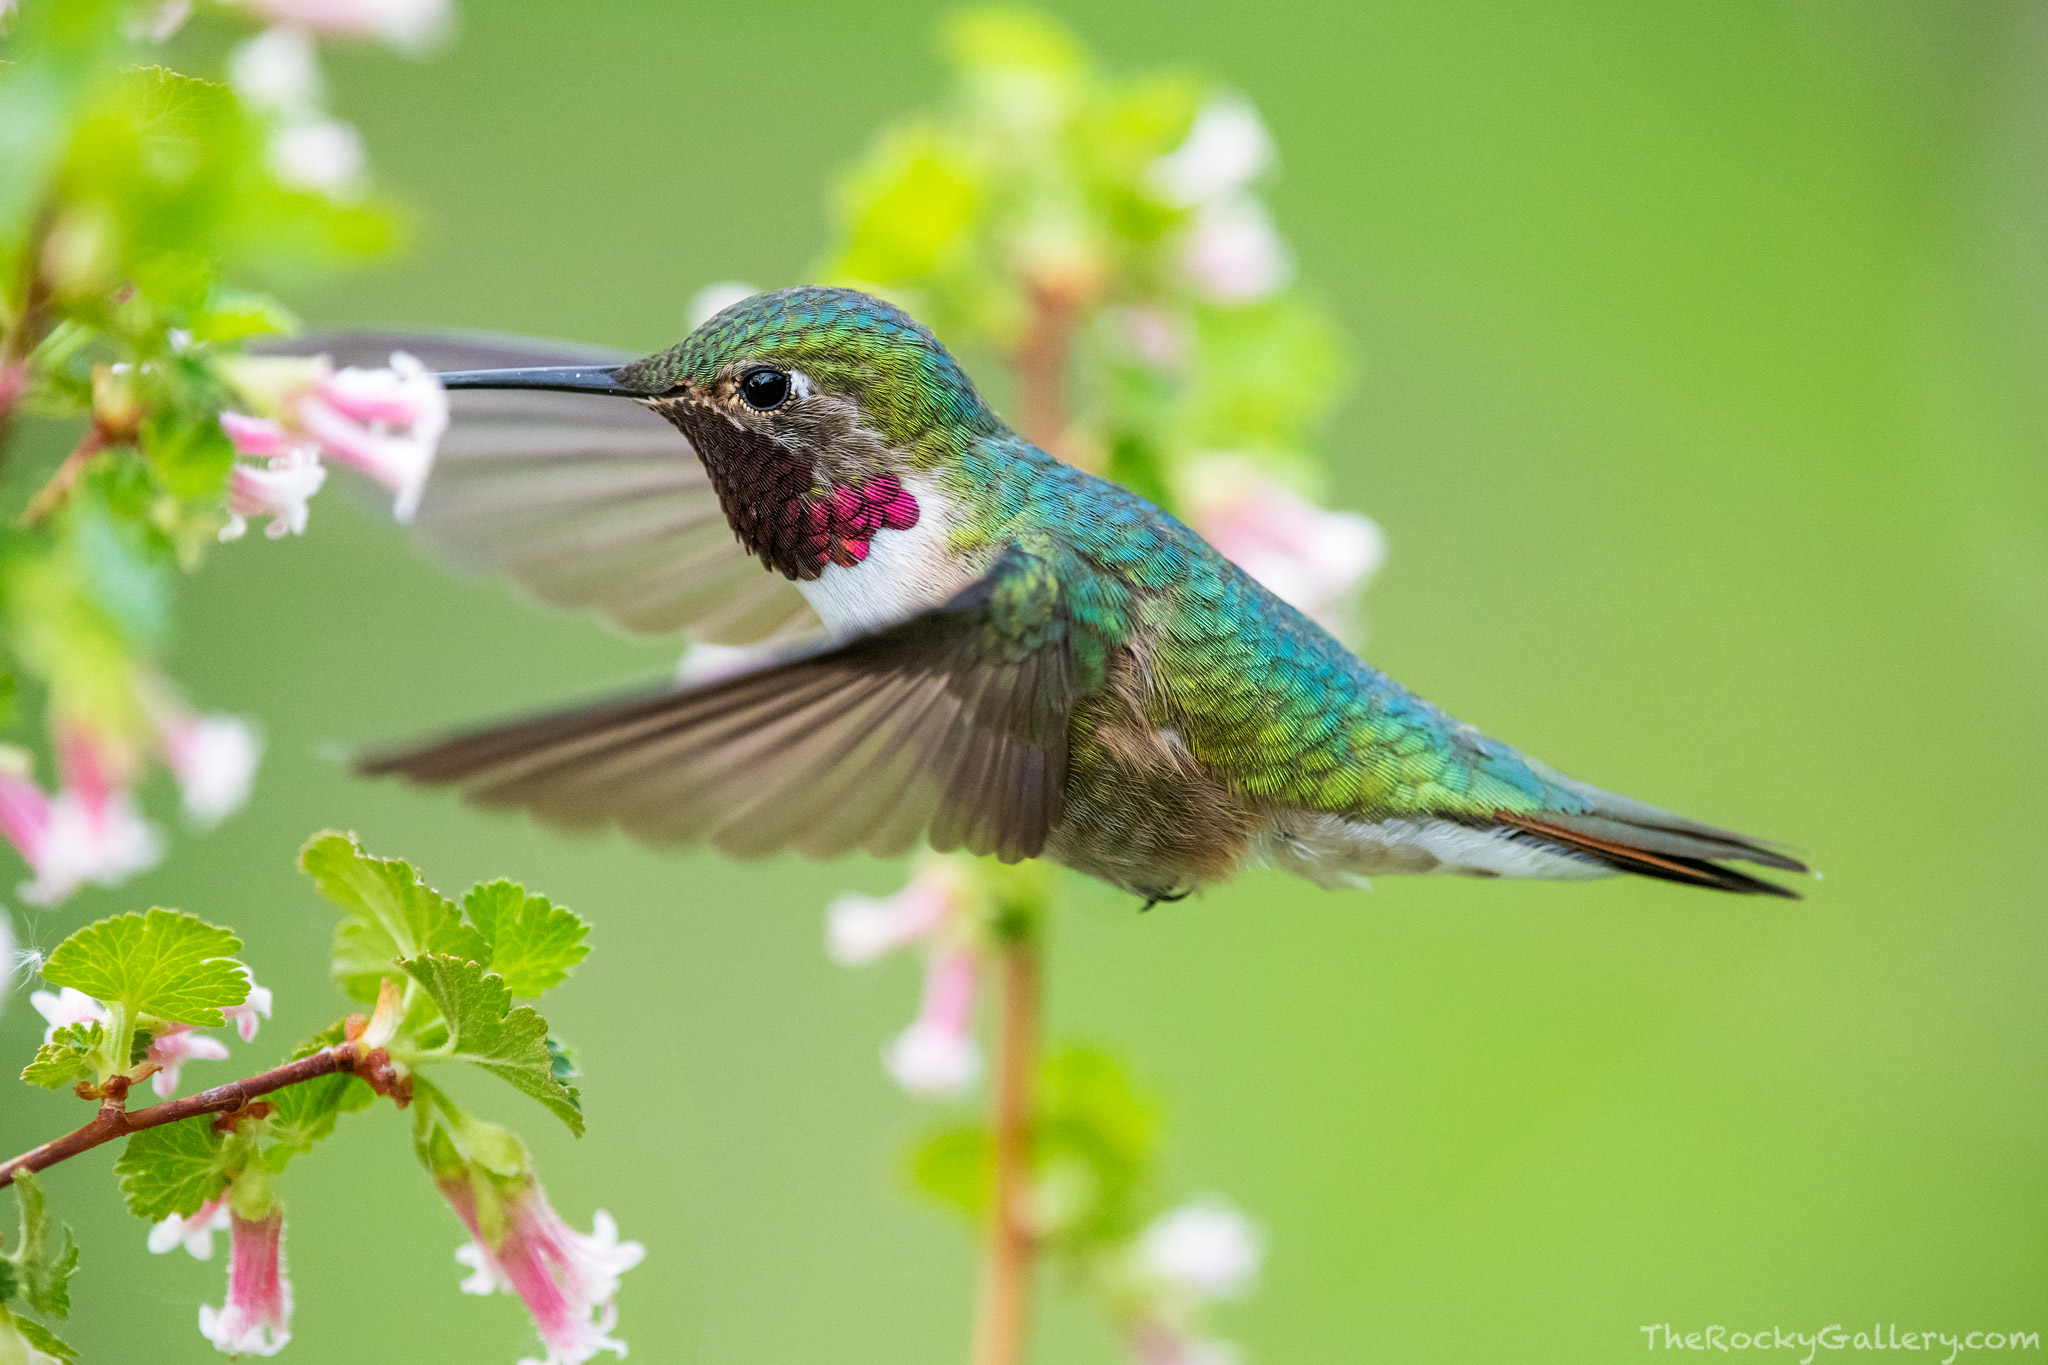 A Broad-tailed hummingbird buzzes the hillsides of the Bierstadt Moraine skirting from flower to flower on a blooming wax currant...